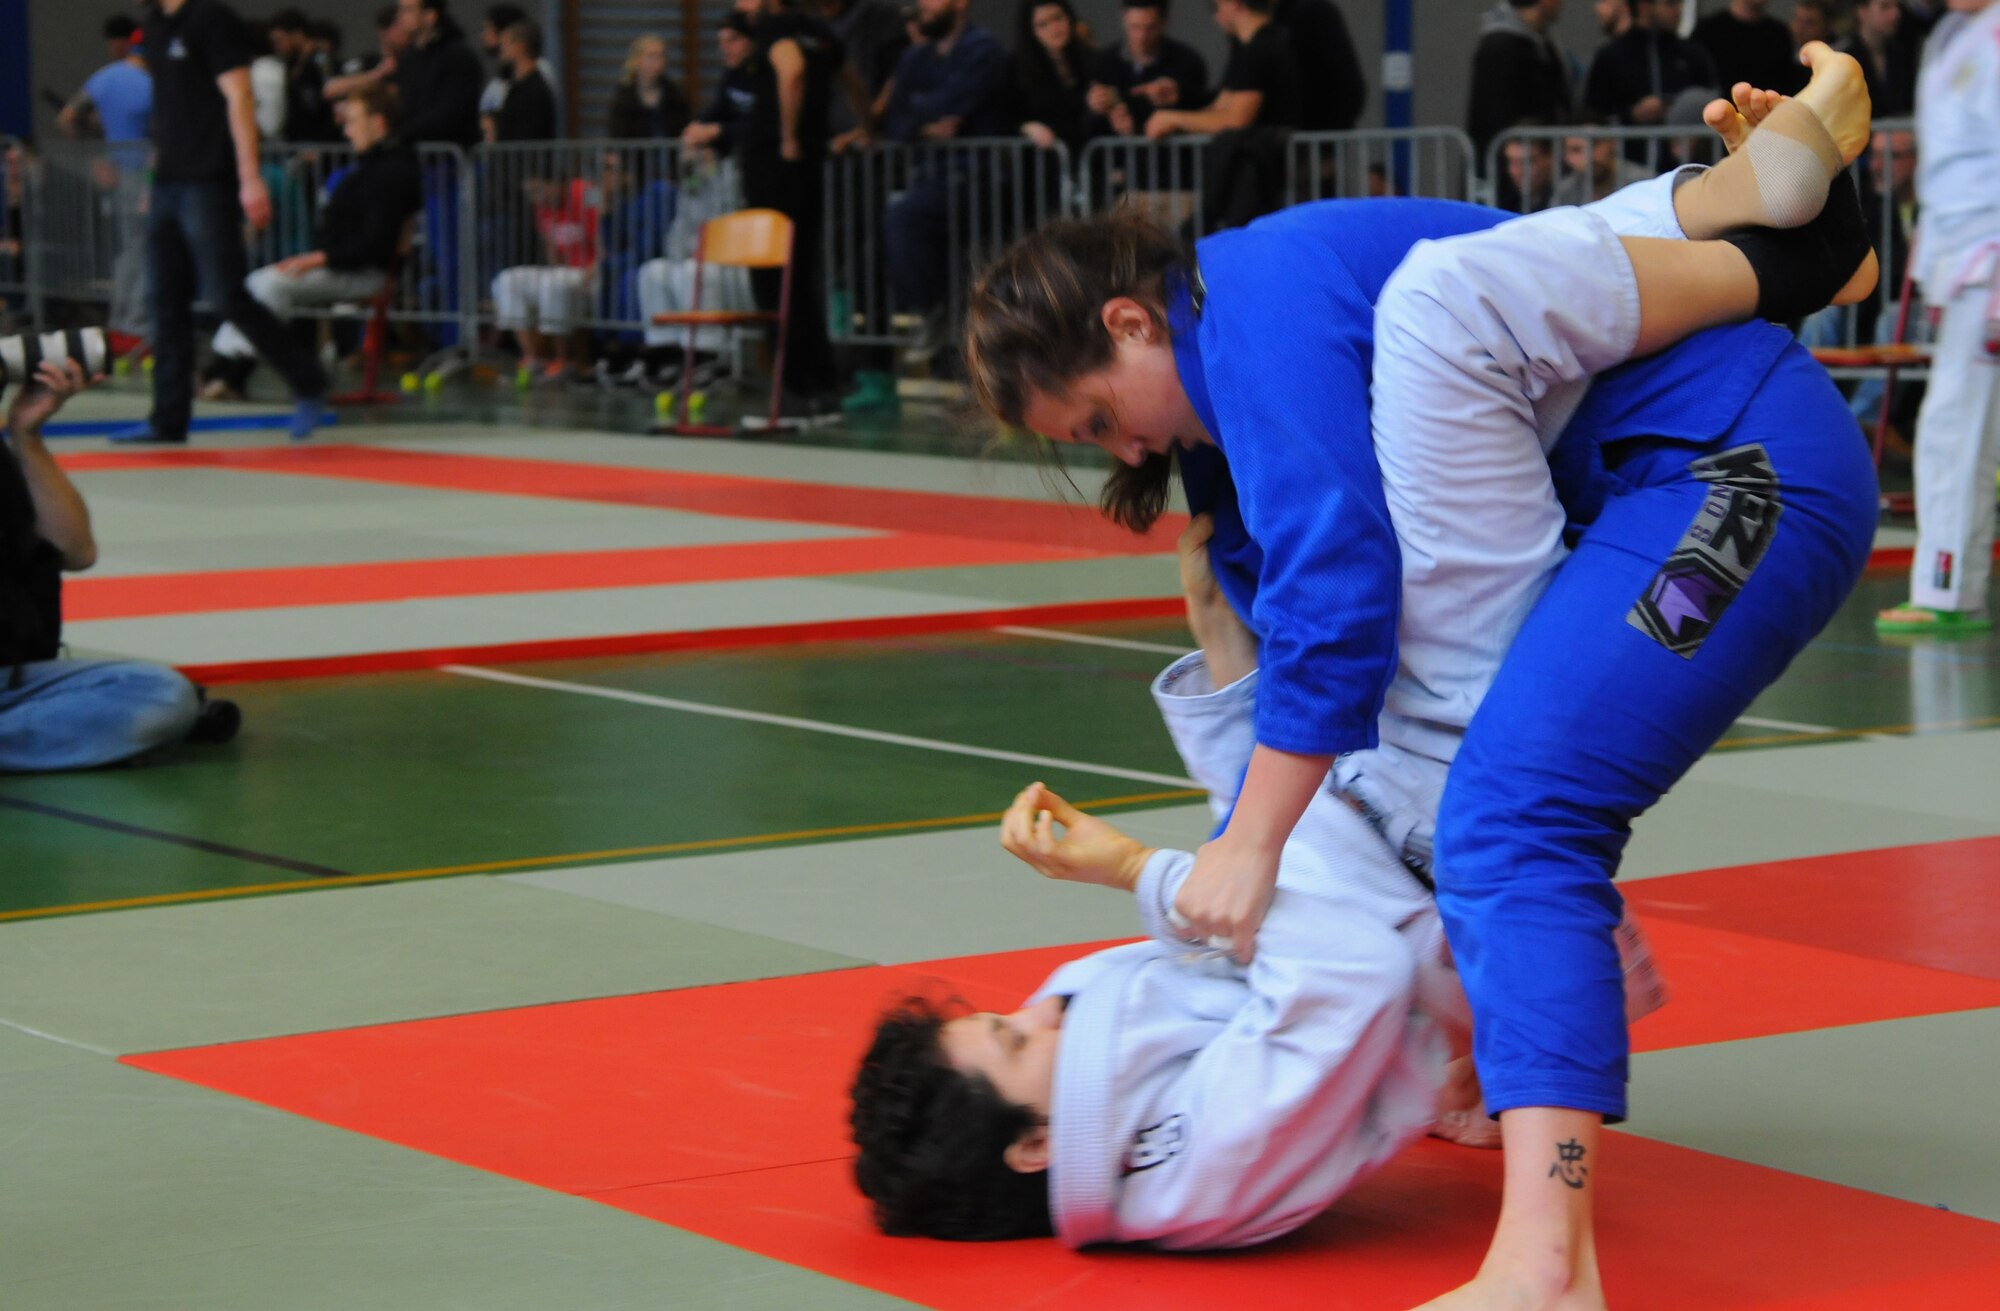 Mariah Johnson, a 52nd Force Support Squadron value-added tax officer and Spangdahlem Brazilian Jiu Jitsu member, right, grapples during her first match at the Submissao competition in Karlsruhe, Germany, Feb. 20, 2016. Johnson lost to her opponent, but received a belt promotion after the match for taking the step to compete. (Courtesy photo)